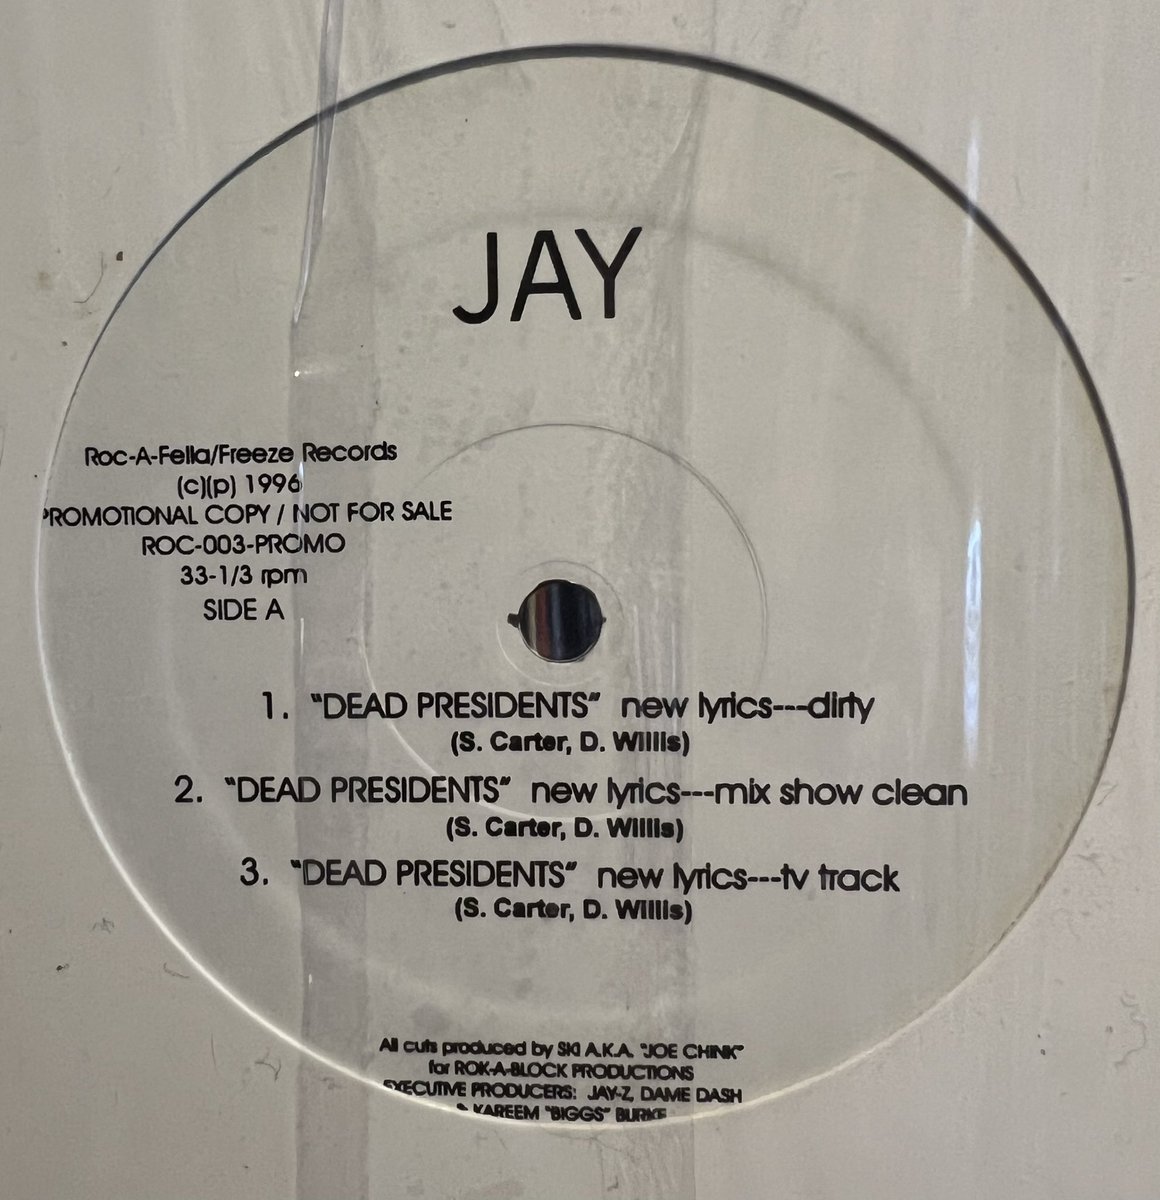 The original 12” version of Dead Presidents is still my favourite Jay track. 
“Well Imma spit that… wonderama shit, me and my conglomerate, shall remain anonymous, caught up in the finest shit…”